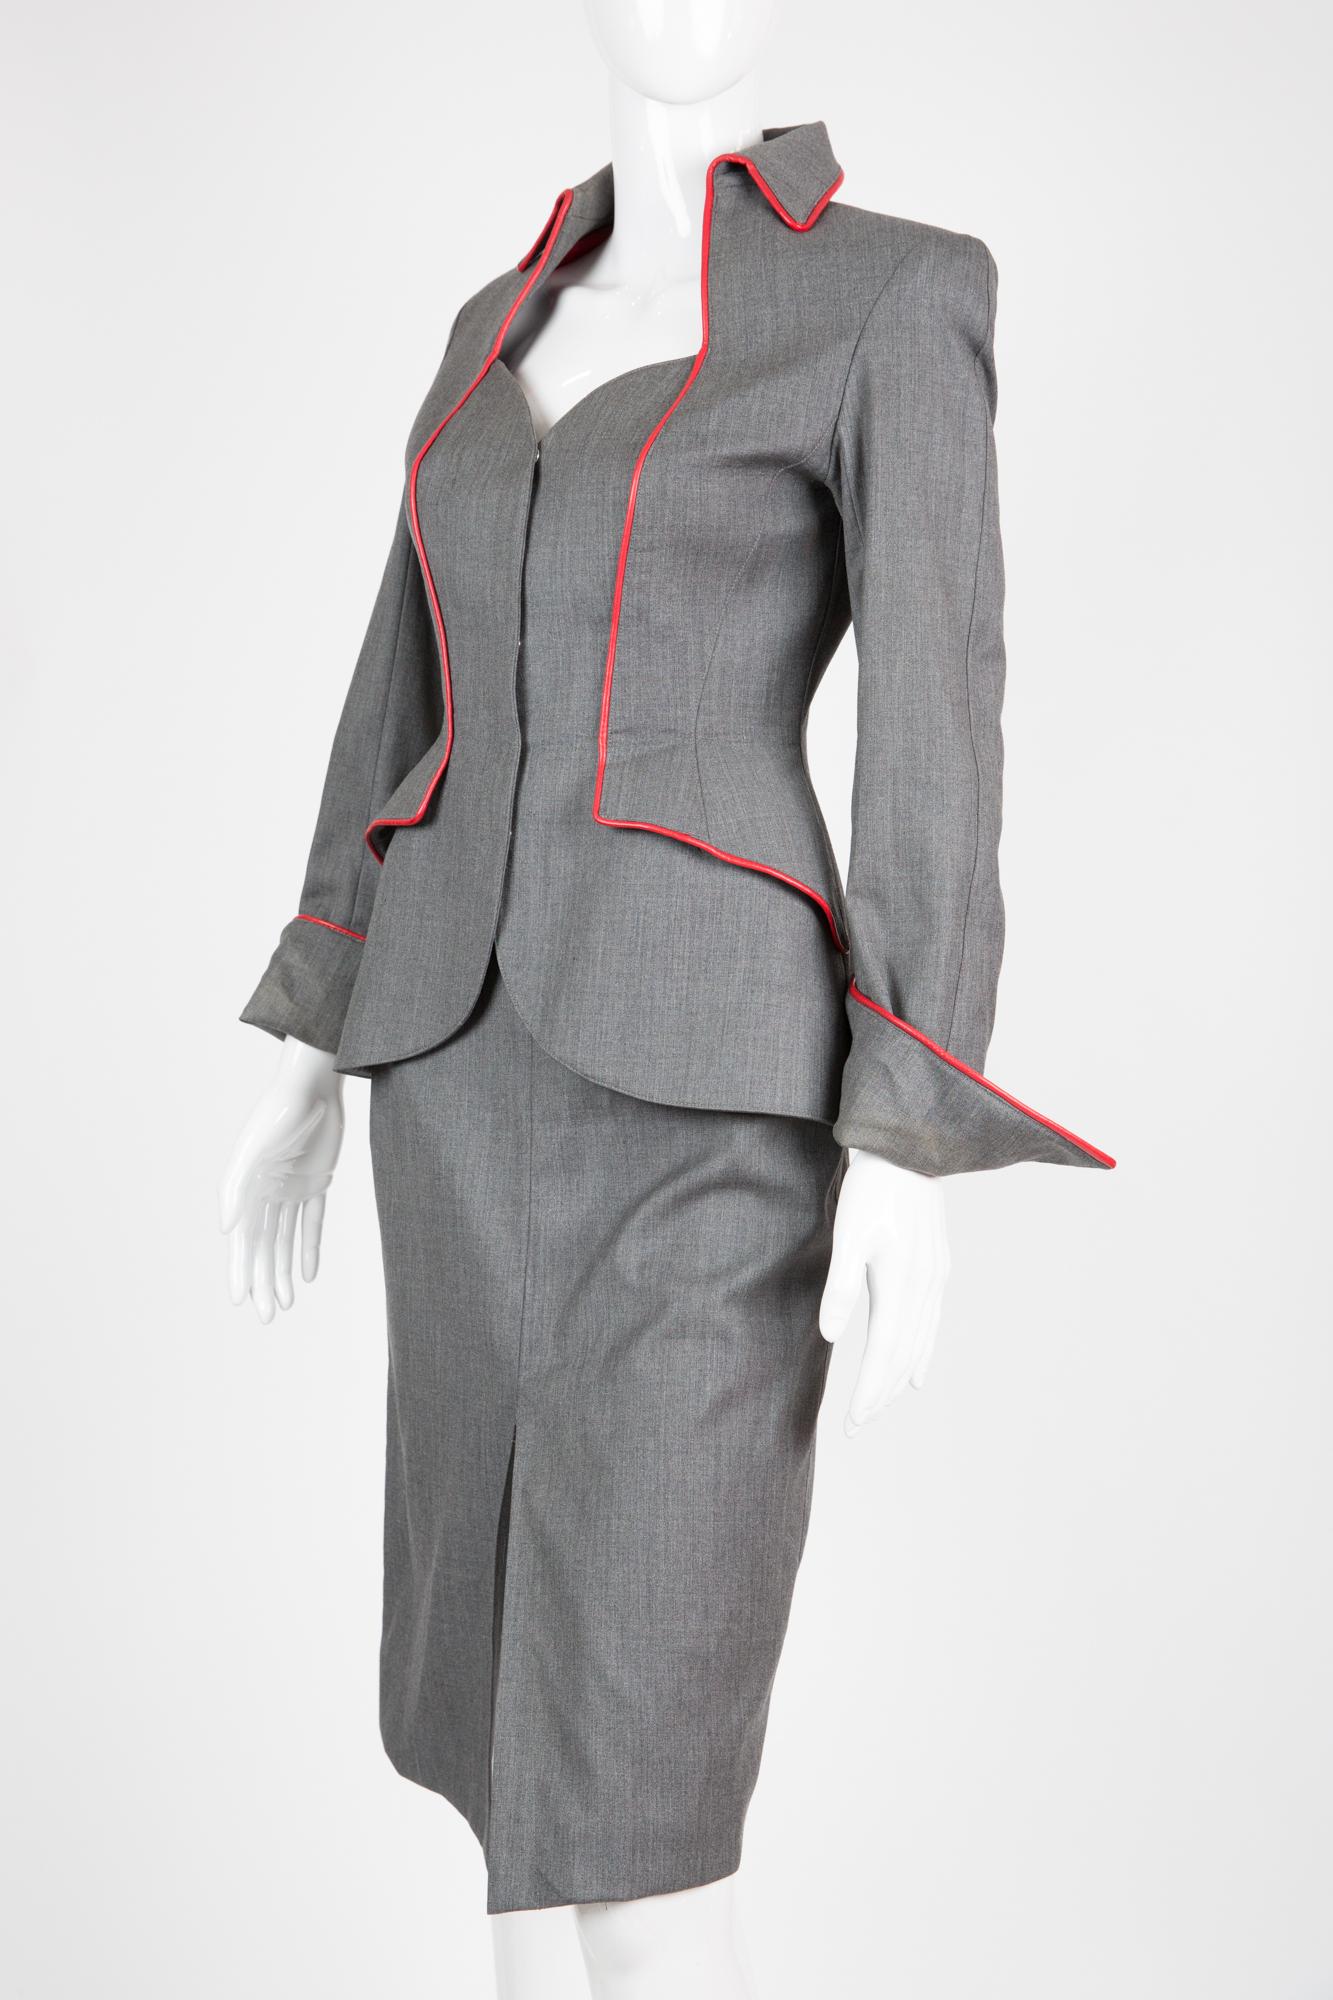 black suit jacket with red lining